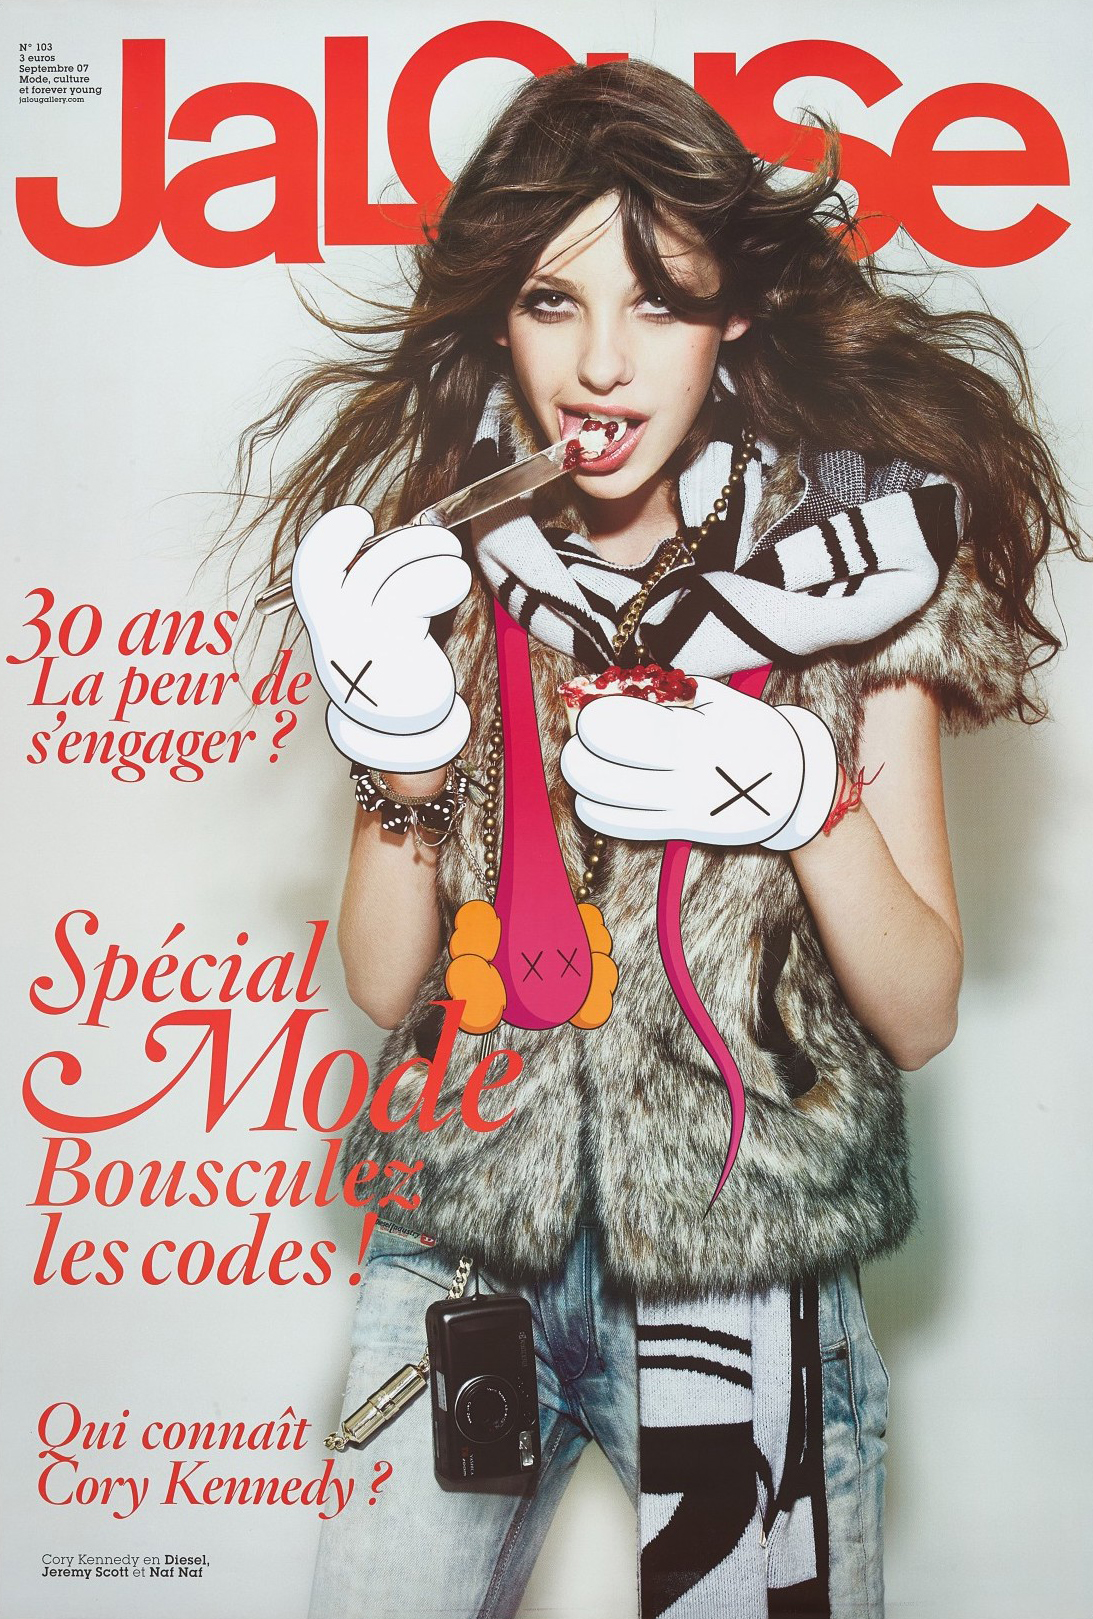 photo offset poster of a magazine cover with a model eating something with animated mickey mouse like hands